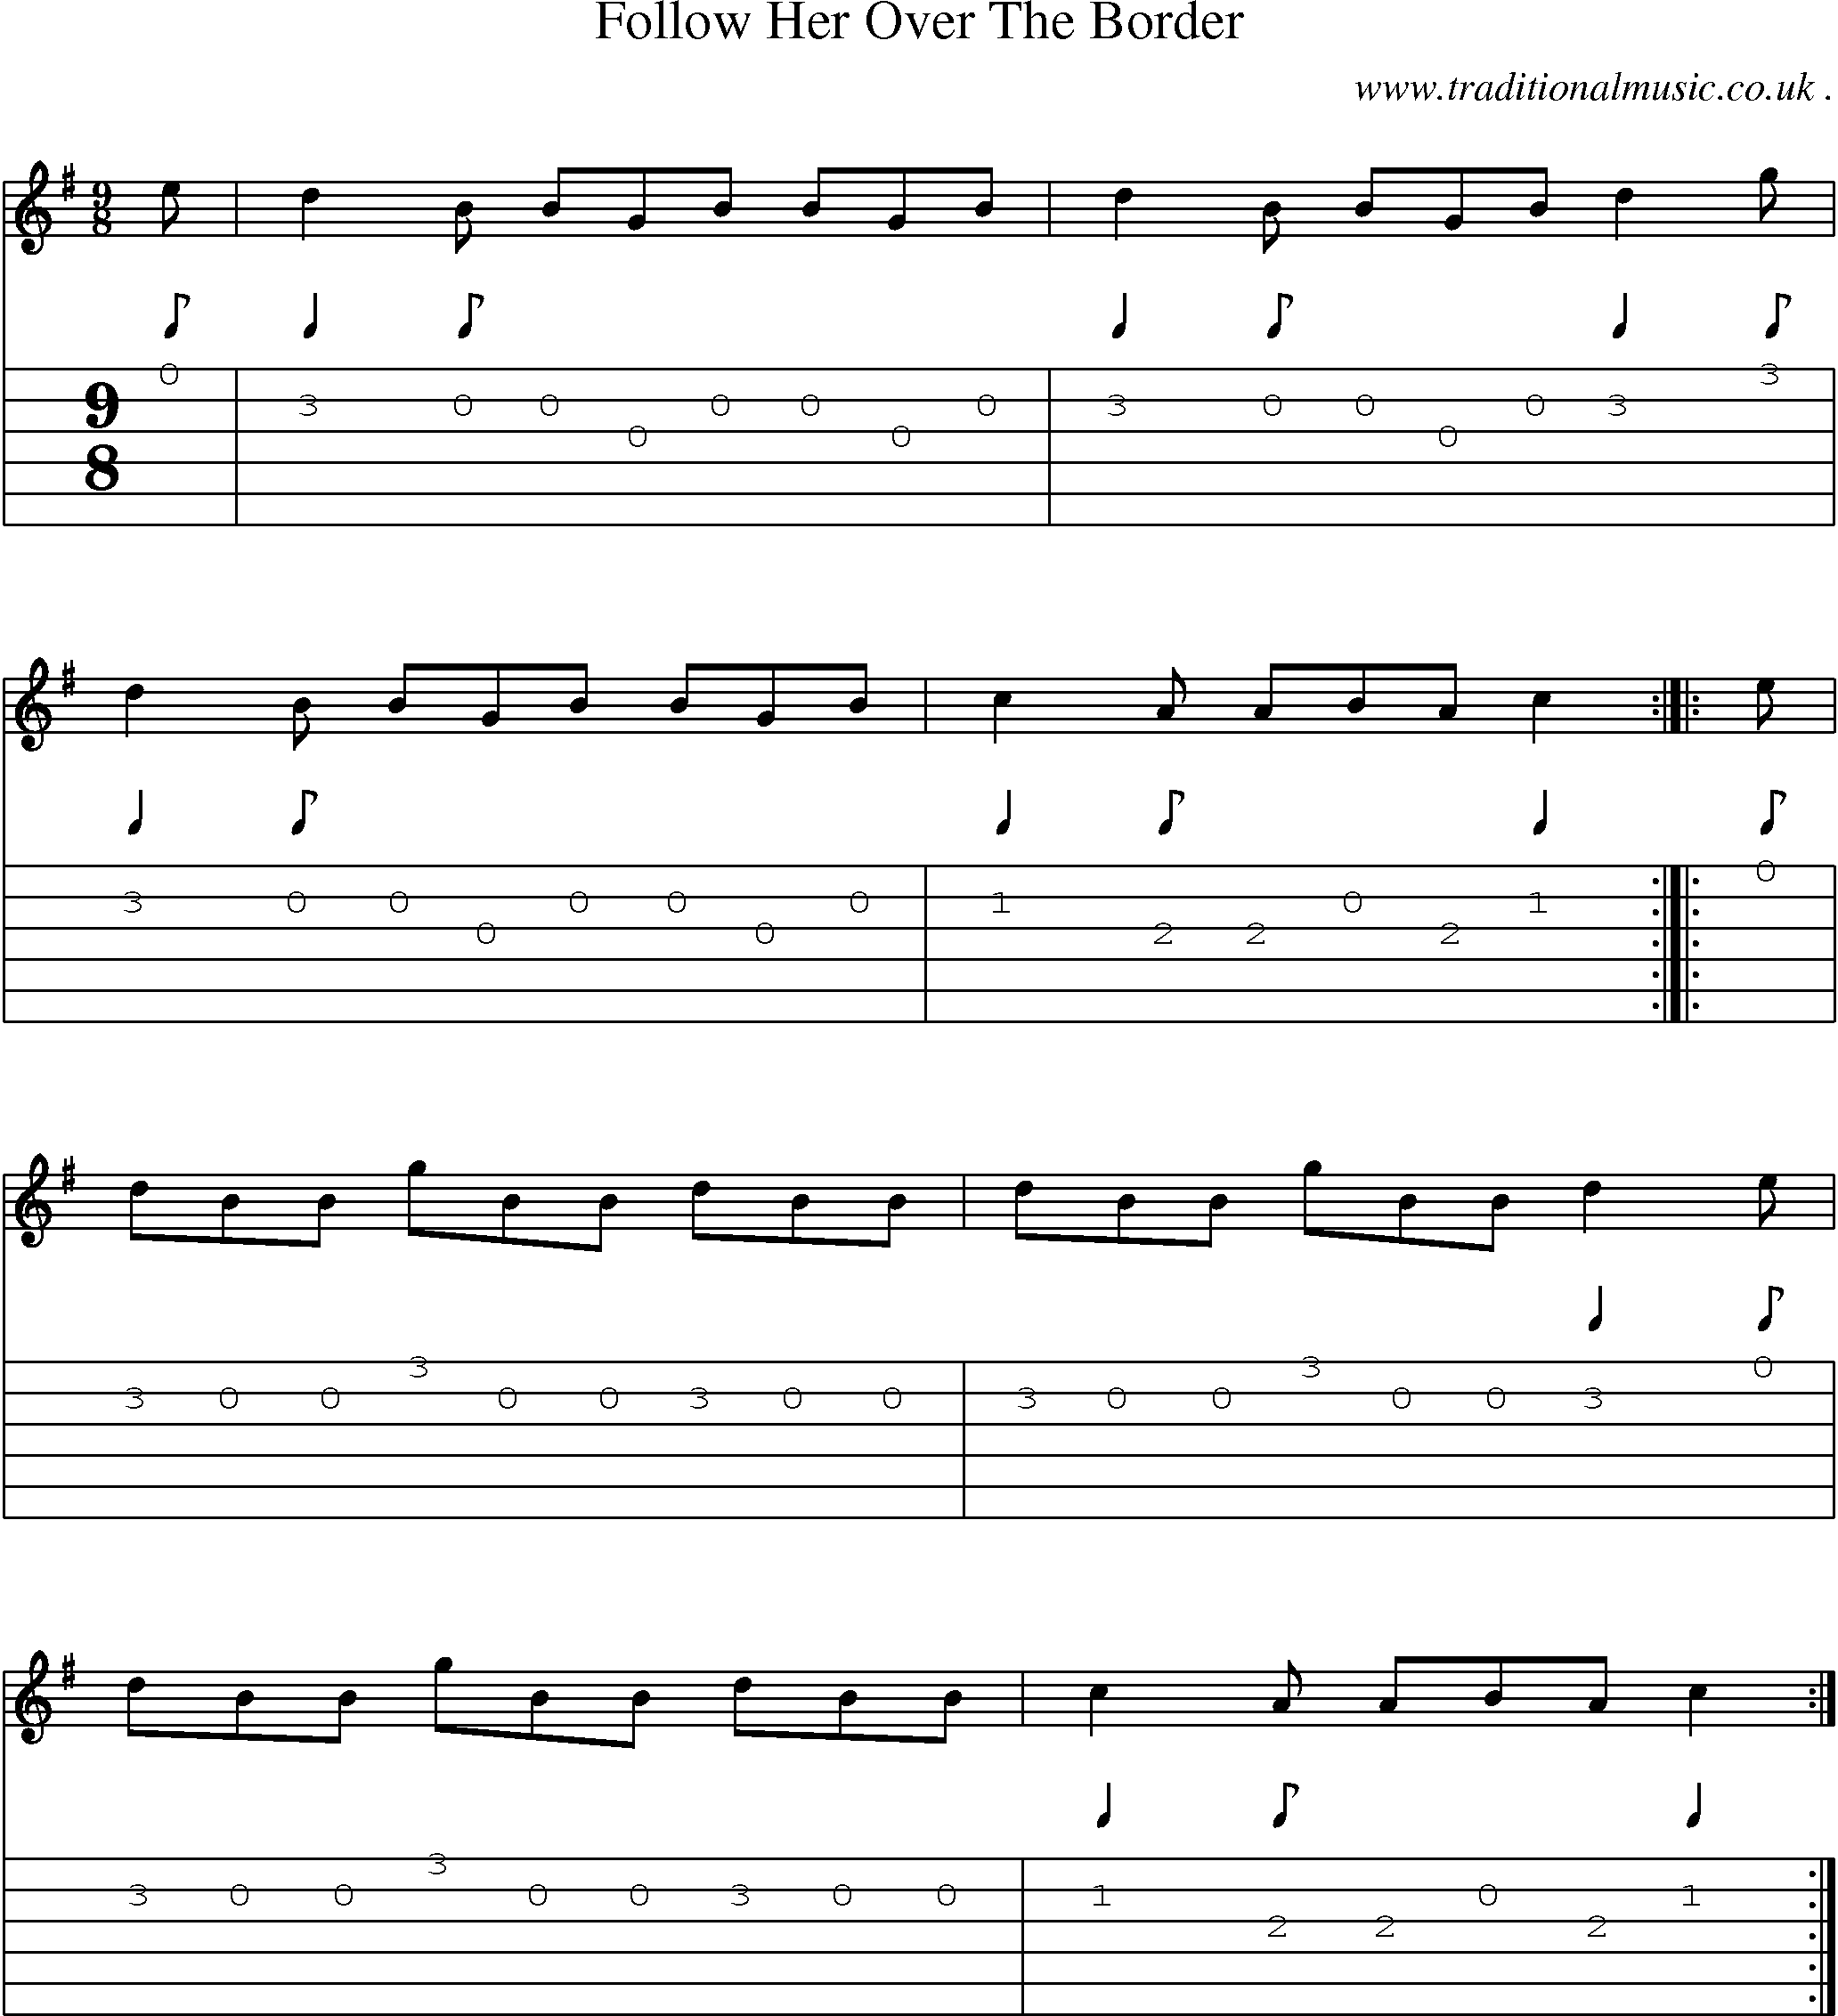 Sheet-Music and Guitar Tabs for Follow Her Over The Border